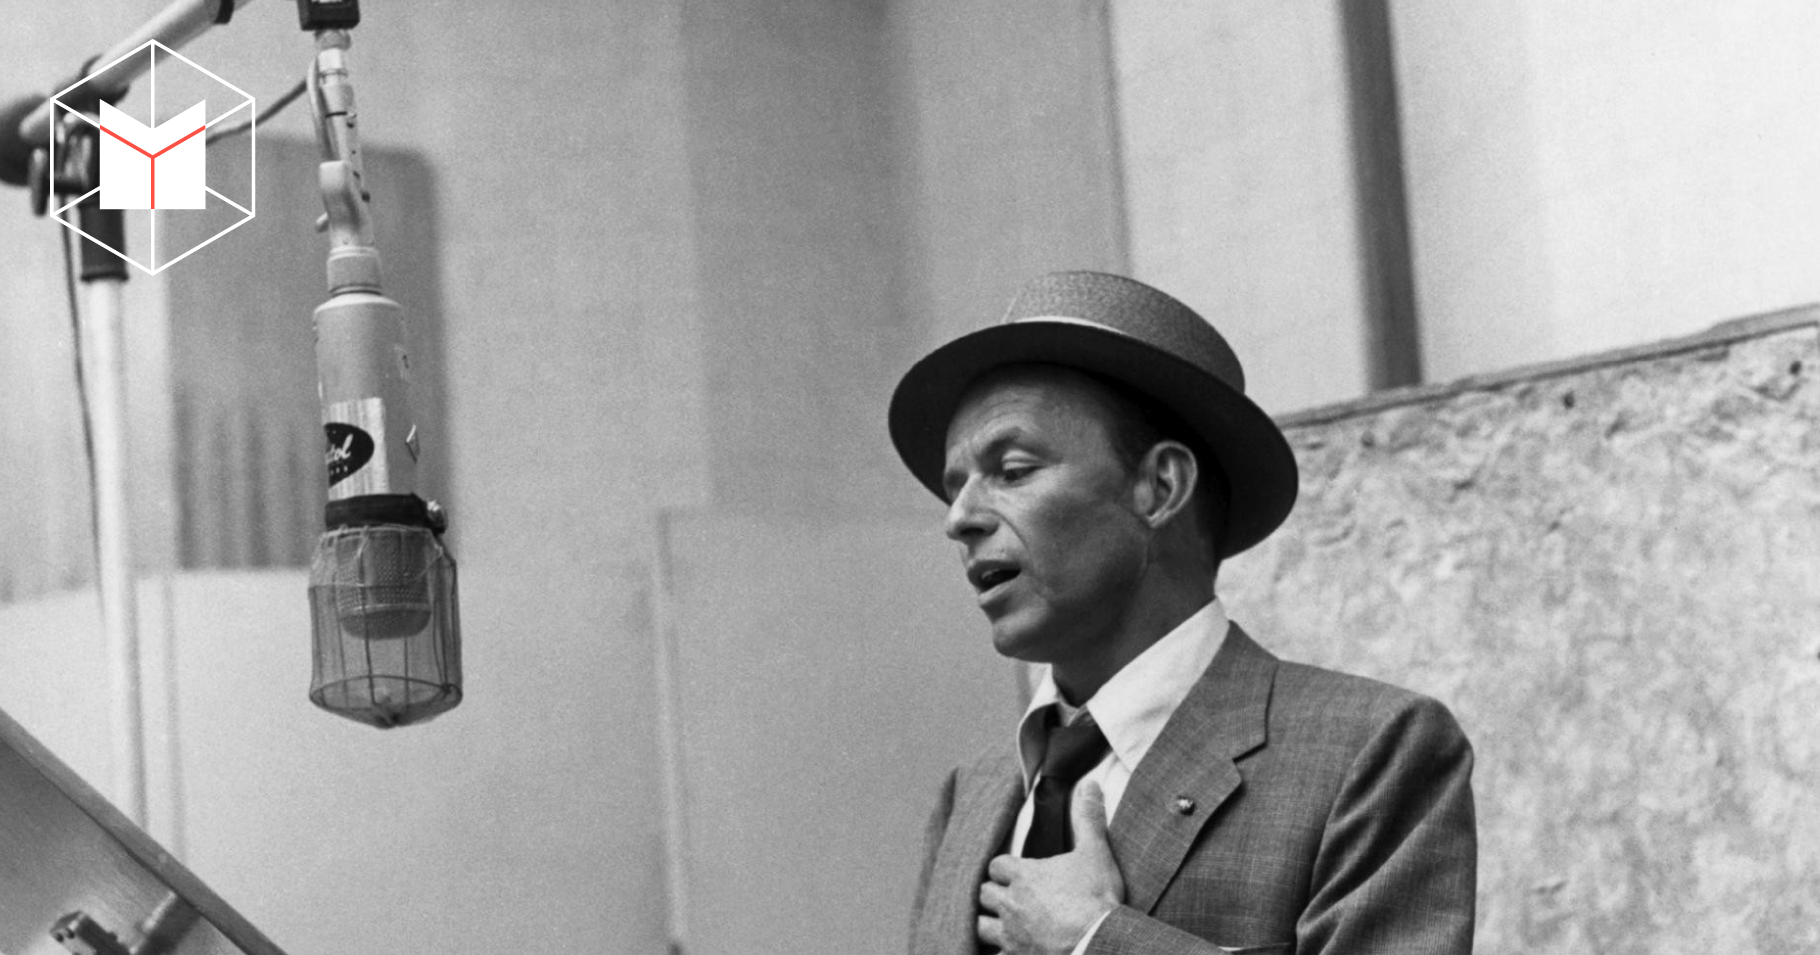 touche meaning that life by frank sinatra